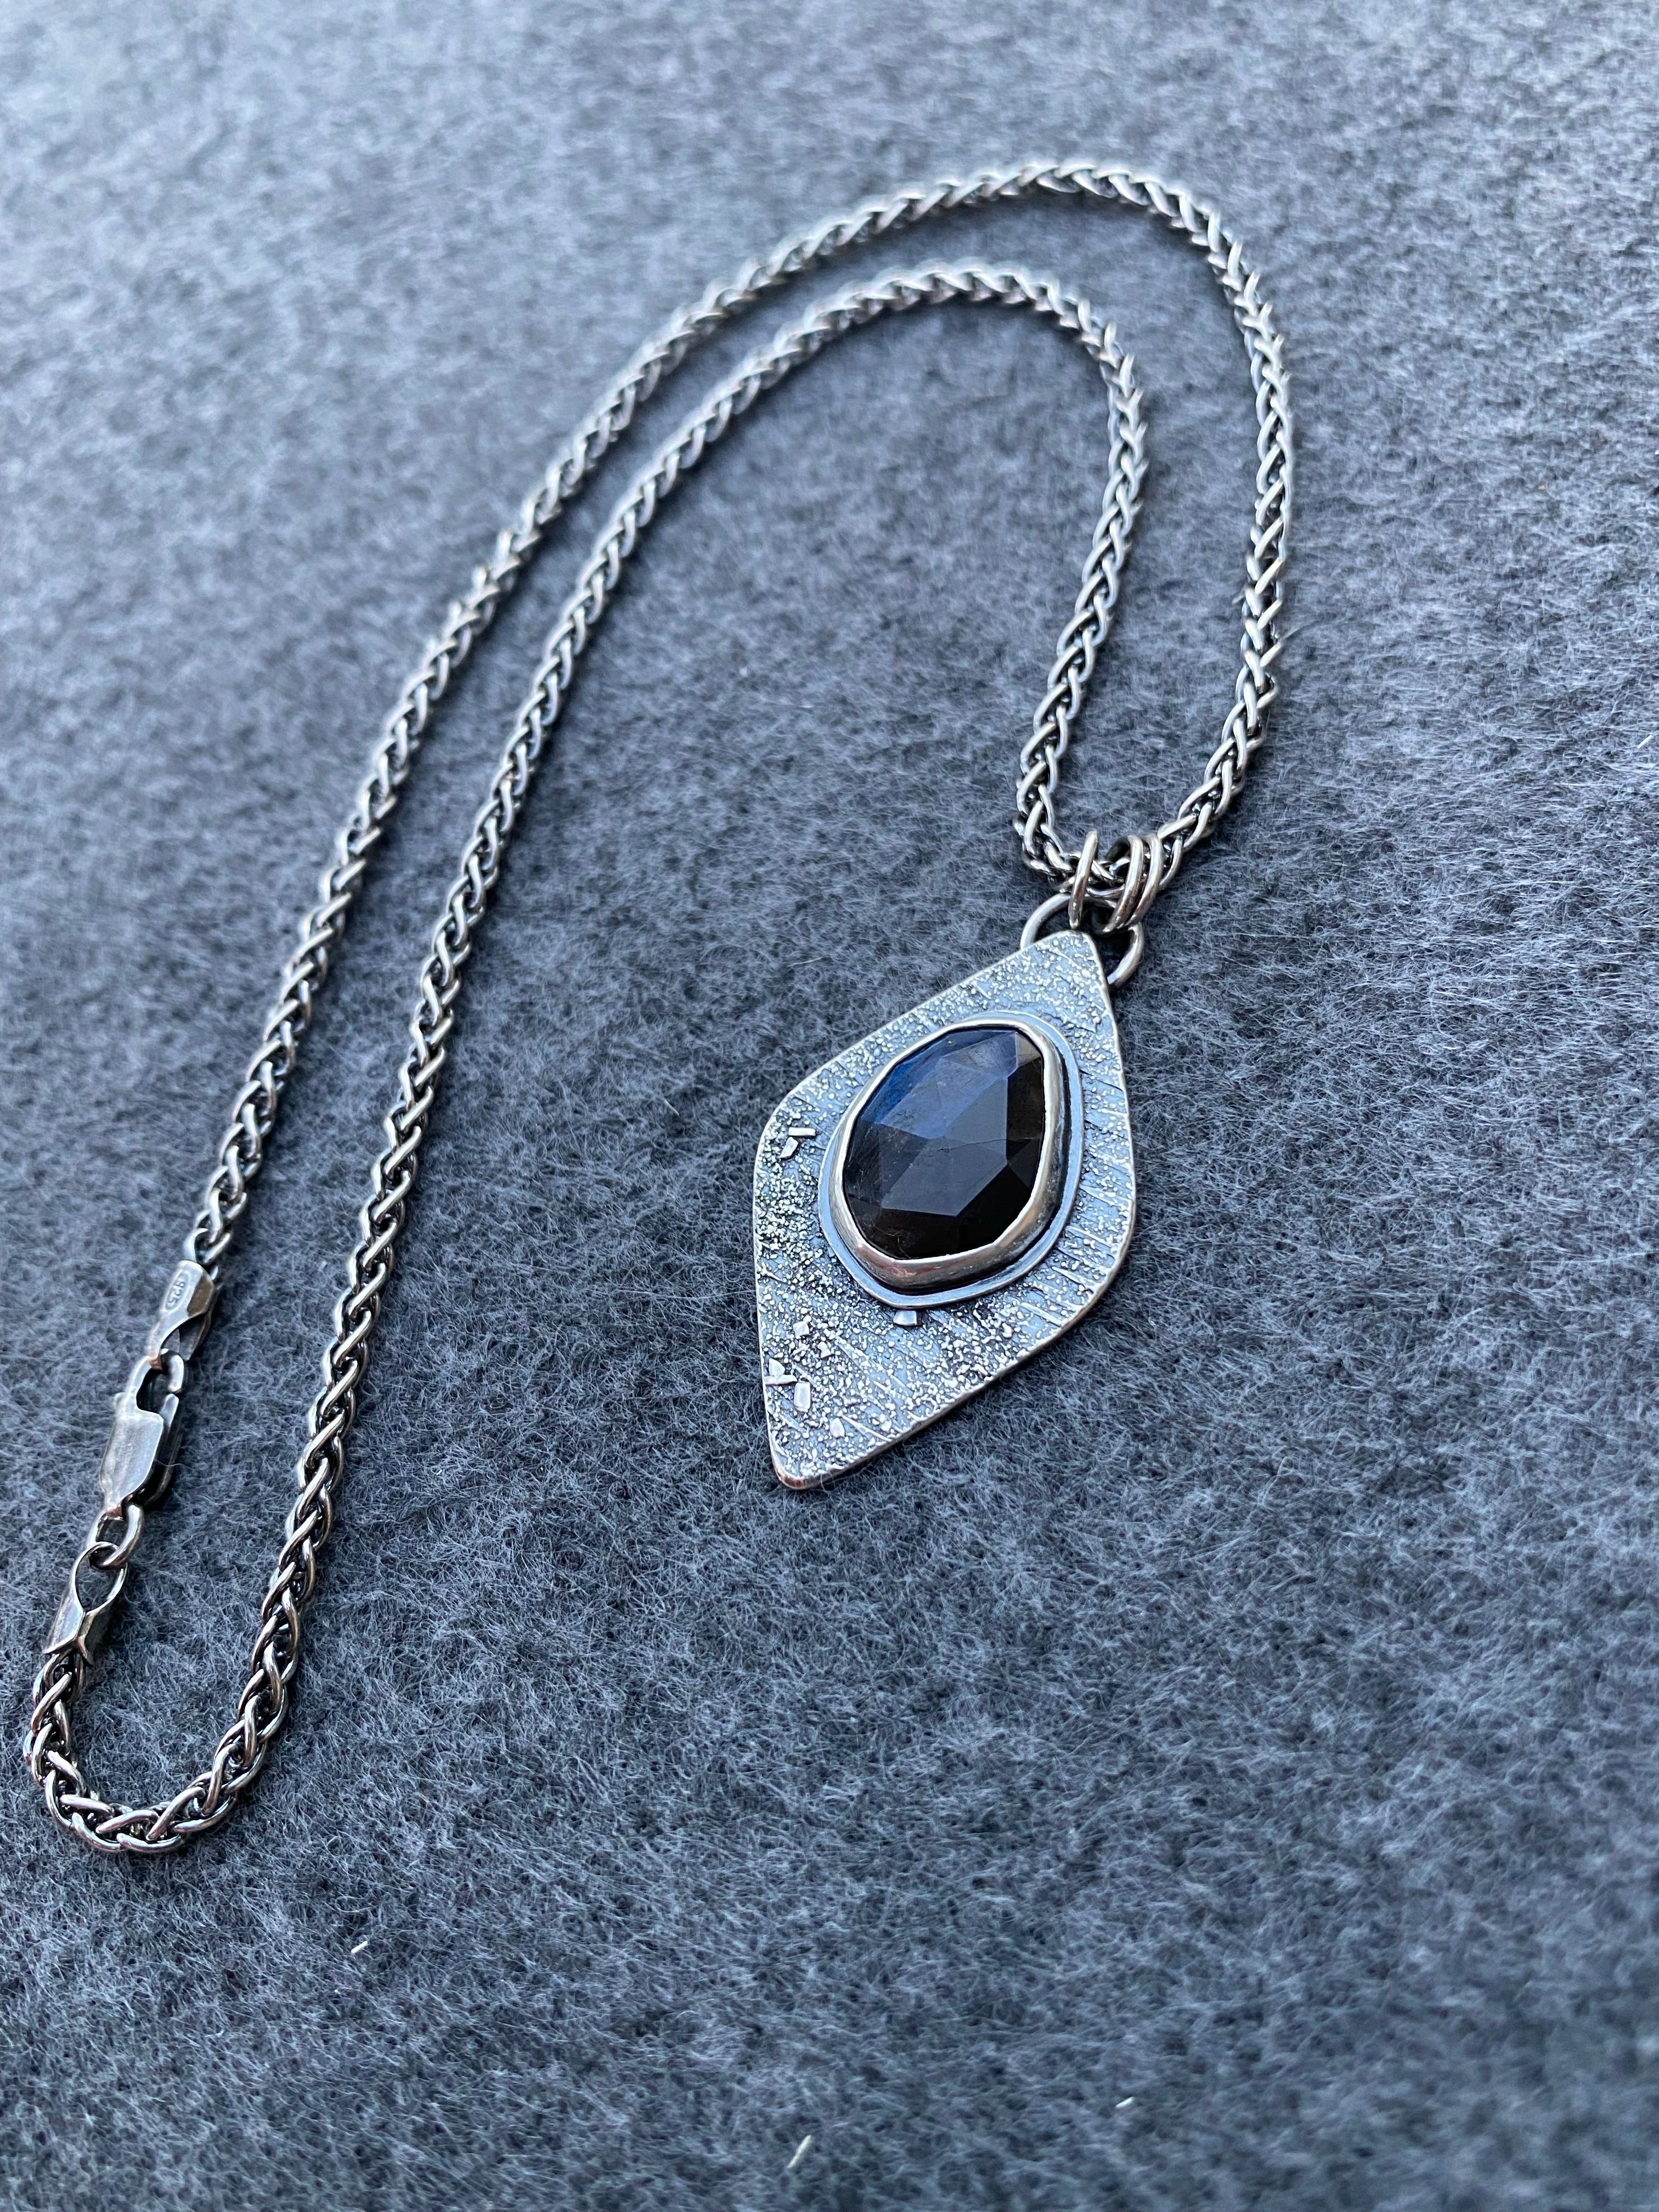 Stardust Pendant Necklace with Labradorite and Sterling Silver